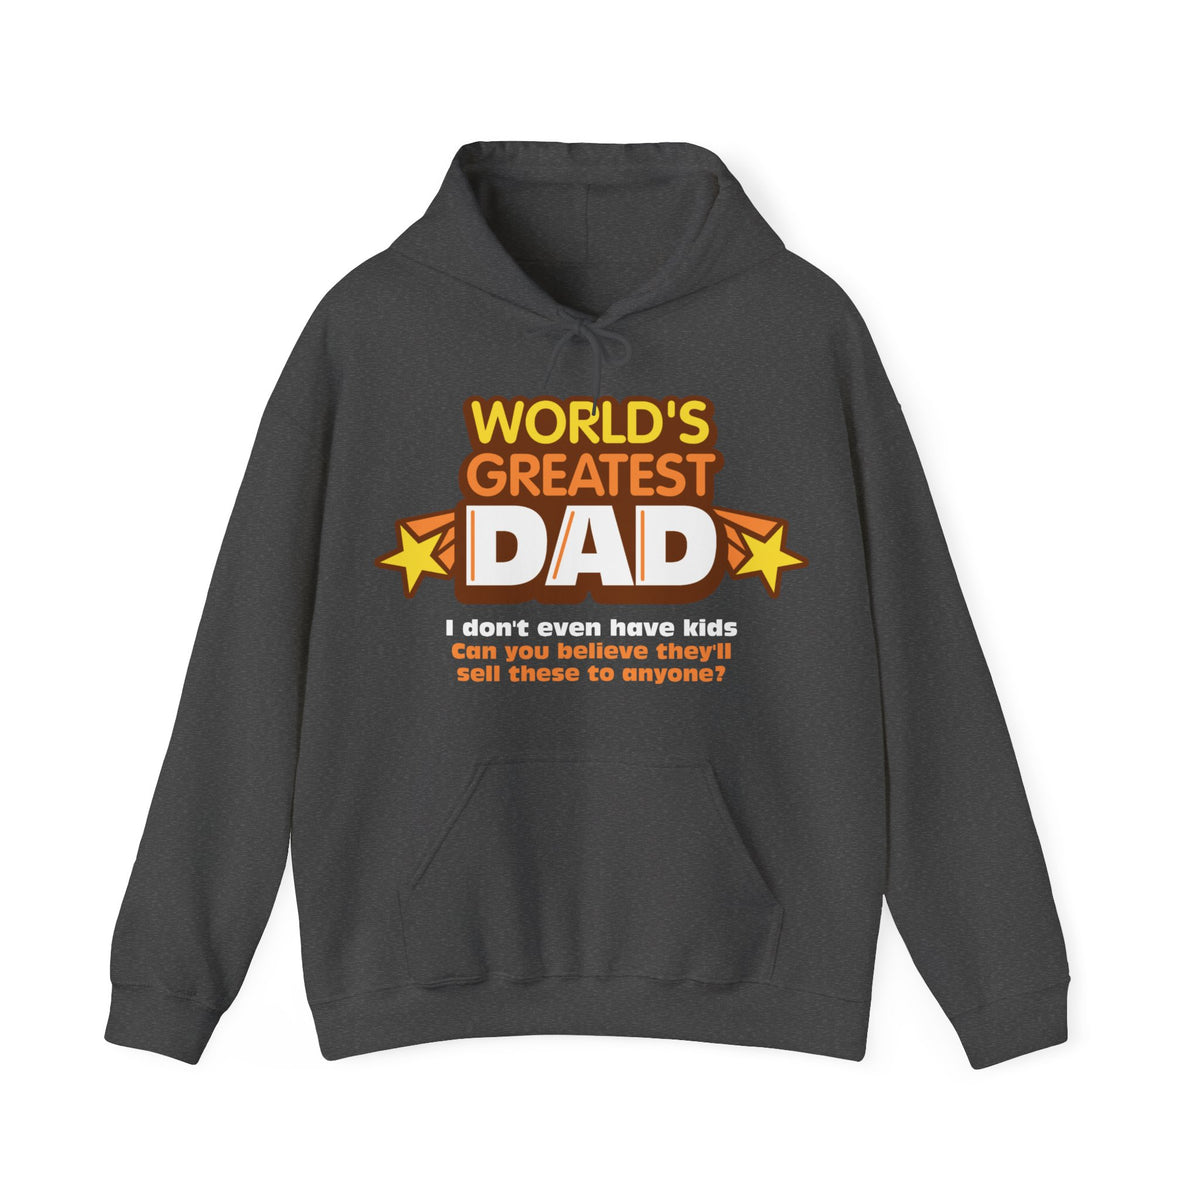 World's Greatest Dad - I Don't Even Have Kids. Can You Believe They'll Sell These To Anyone? - Hoodie